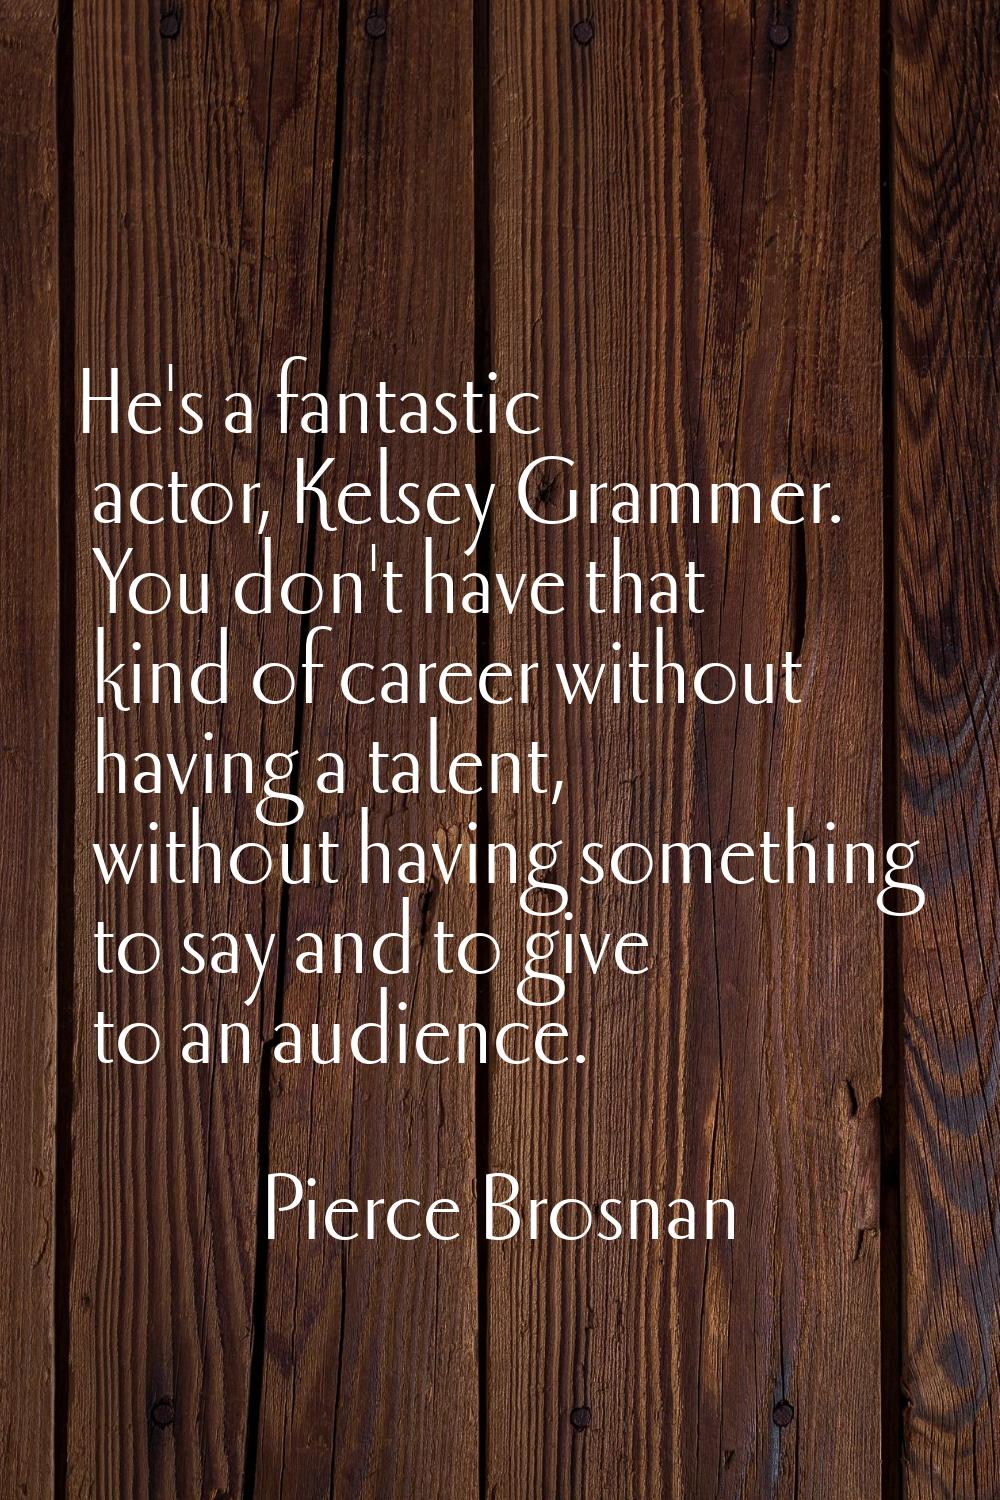 He's a fantastic actor, Kelsey Grammer. You don't have that kind of career without having a talent,